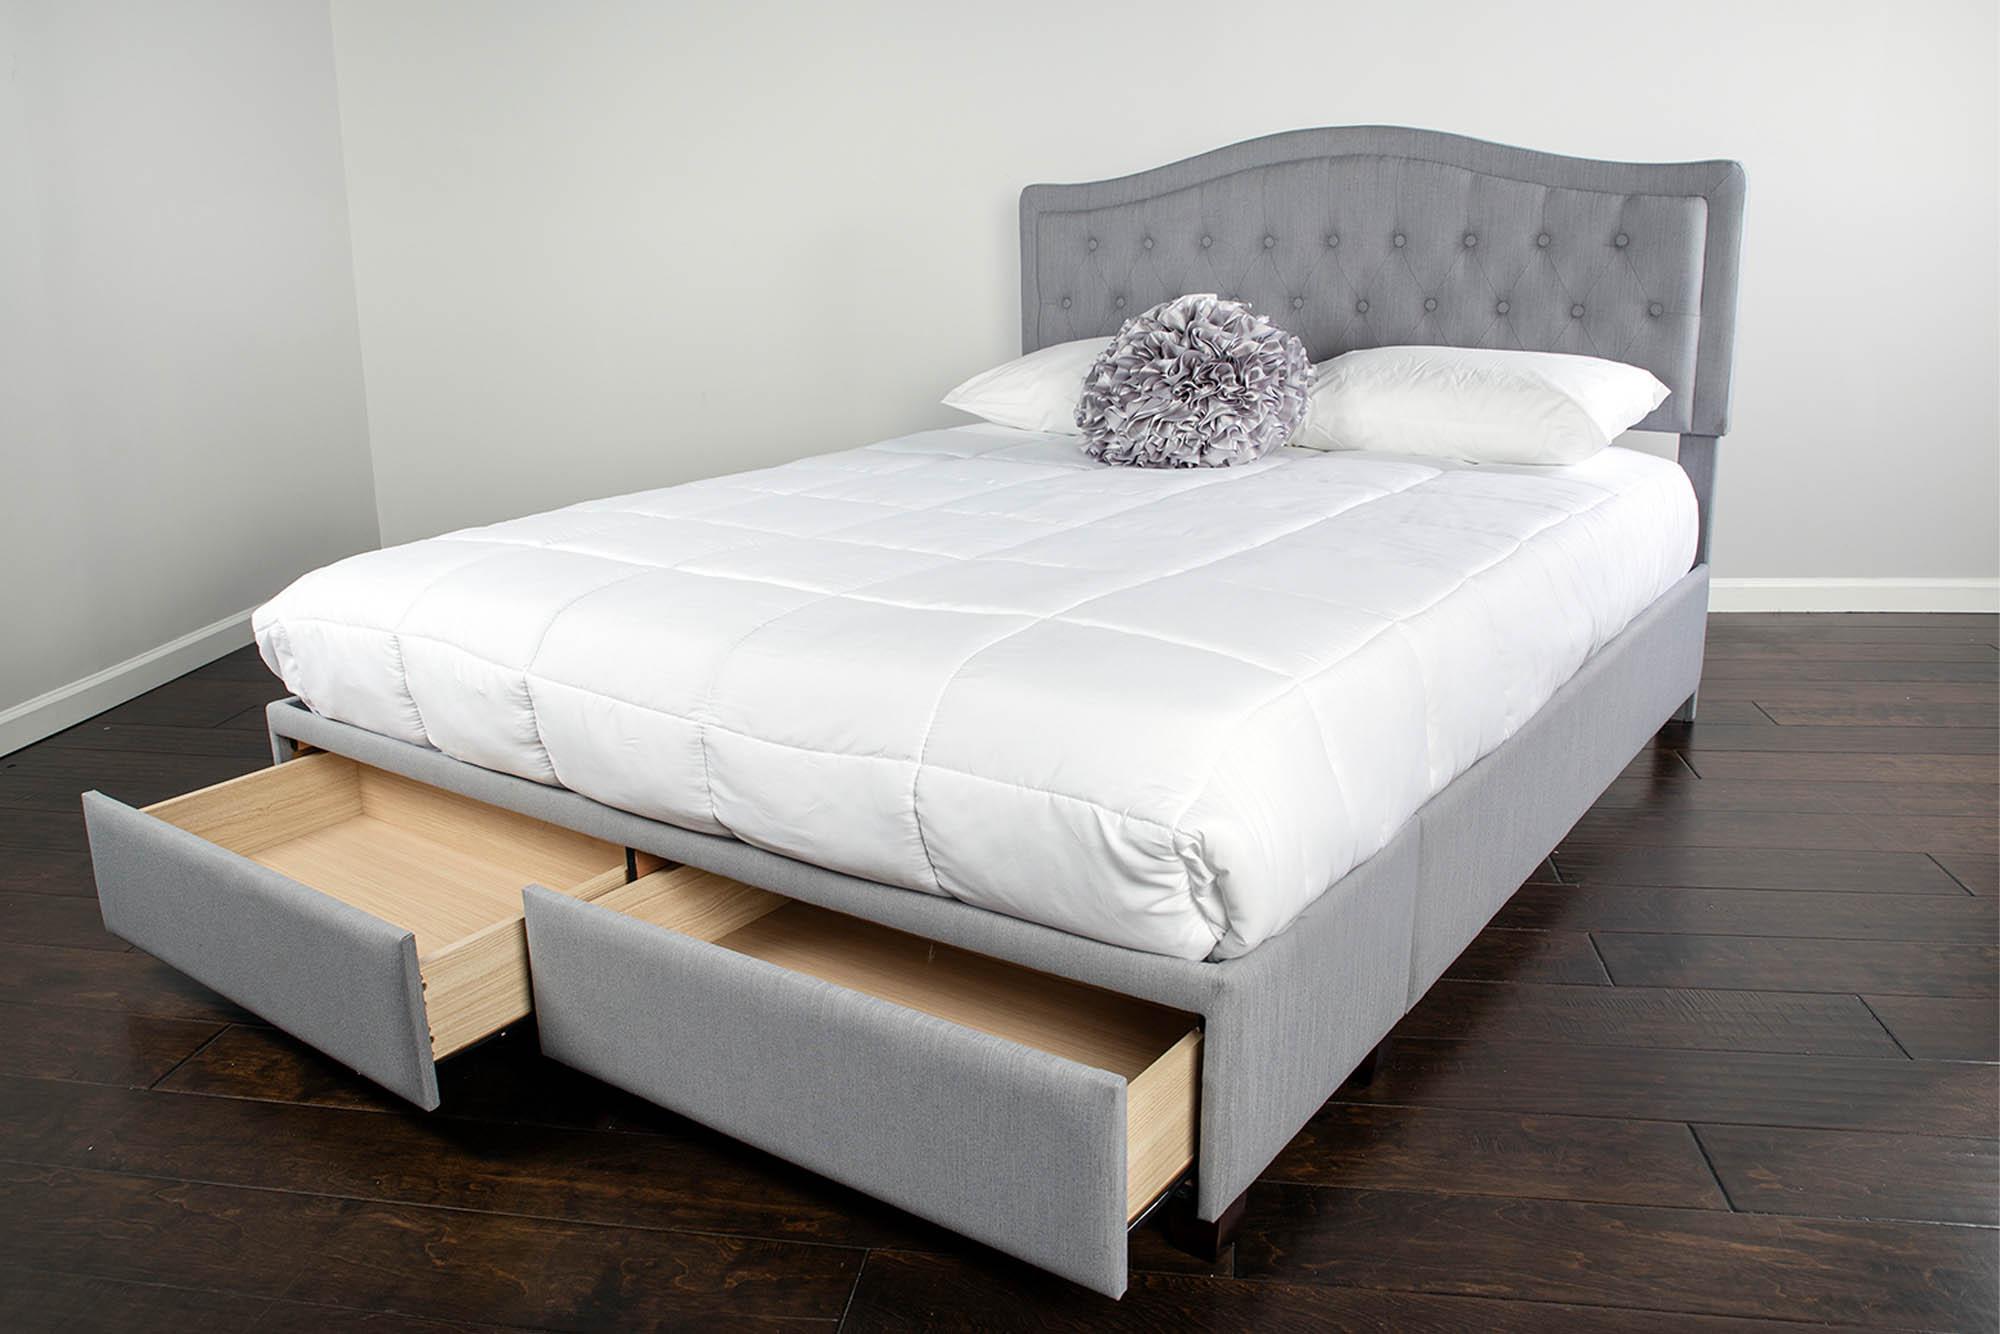 Modern, Transitional Storage Bed SKYLA 1190DS-105 1190DS-105 in Gray Fabric